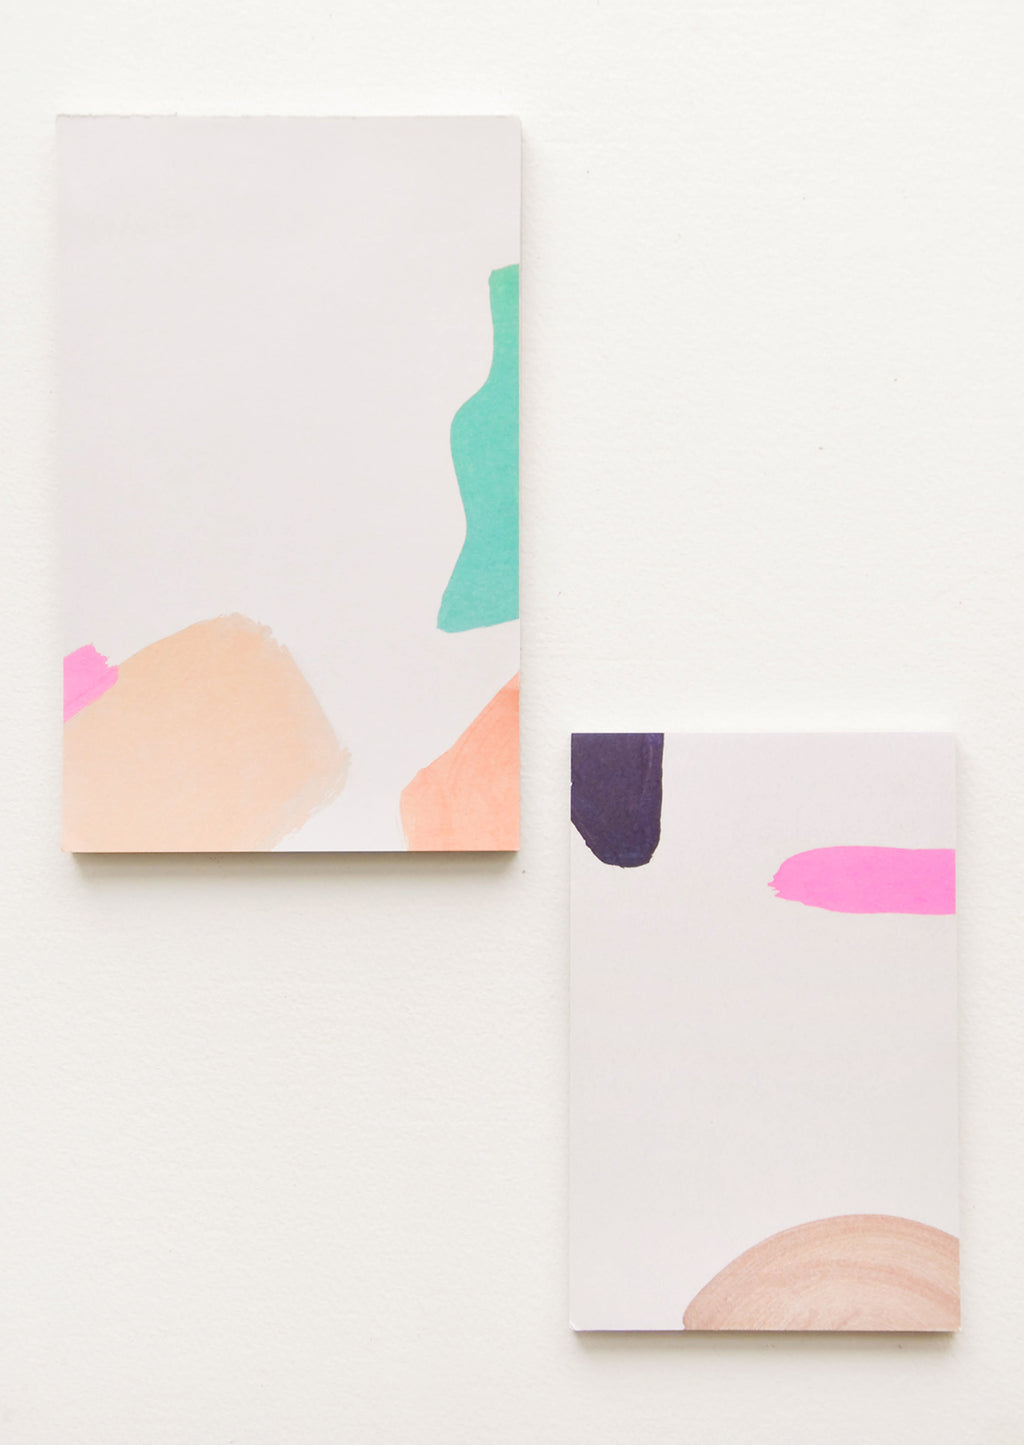 3: Two notepads, decorated with colorful abstract shapes.